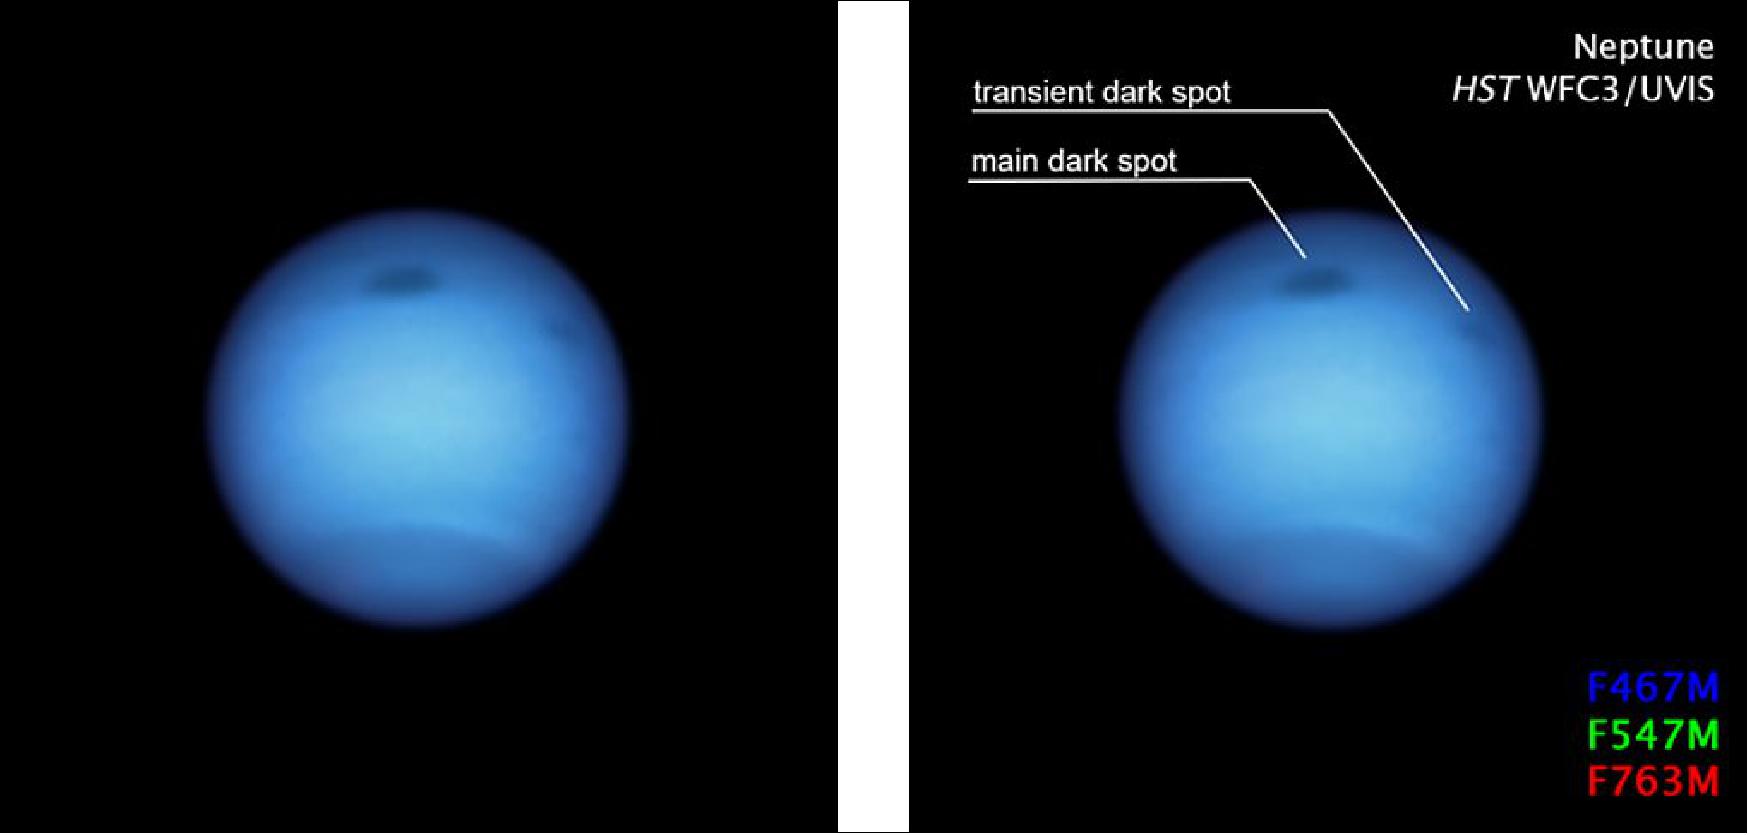 Figure 2: Hubble uncovers a pair of Dark Vortices on Neptune. This Hubble Space Telescope snapshot of the dynamic blue-green planet Neptune reveals a monstrous dark storm [top center] and the emergence of a smaller dark spot nearby [top right]. The giant vortex, which is wider than the Atlantic Ocean, was traveling south toward certain doom by atmospheric forces at the equator when it suddenly made a U-turn and began drifting back northward. Hubble's WFC3 (Wide Field Camera 3) captured this visible-light image on Jan. 7, 2020, the same time a slightly smaller dark spot mysteriously appeared nearby. That spot then vanished a few months later. The smaller feature may have been a piece of the giant storm that broke off as the larger vortex approached the equator. - Hubble uncovered the giant storm in September 2018 in Neptune's northern hemisphere. The feature is roughly 4,600 miles across. The estimated width of the smaller spot is 3,900 miles. - The large storm is the fourth transient dark spot Hubble has observed since 1993. NASA's Voyager 2 spacecraft first imaged two dark features in Neptune's southern hemisphere in 1989 as Voyager flew by the distant planet. Those storms had disappeared by the time Hubble looked at Neptune in 1994. However, Hubble detected two new dark spots in the planet's northern hemisphere in 1994 and 1996. - It's unclear how these storms form. Their clouds may be rising to higher altitudes, compared to surrounding regions in the gas giant's atmosphere. - Neptune's predominant blue color is due to the absorption of red light by the distant planet's methane-rich atmosphere [image credits: NASA, ESA, STScI, M. H. Wong (University of California, Berkeley) and L. A. Sromovsky and P. M. Fry (University of Wisconsin-Madison)]